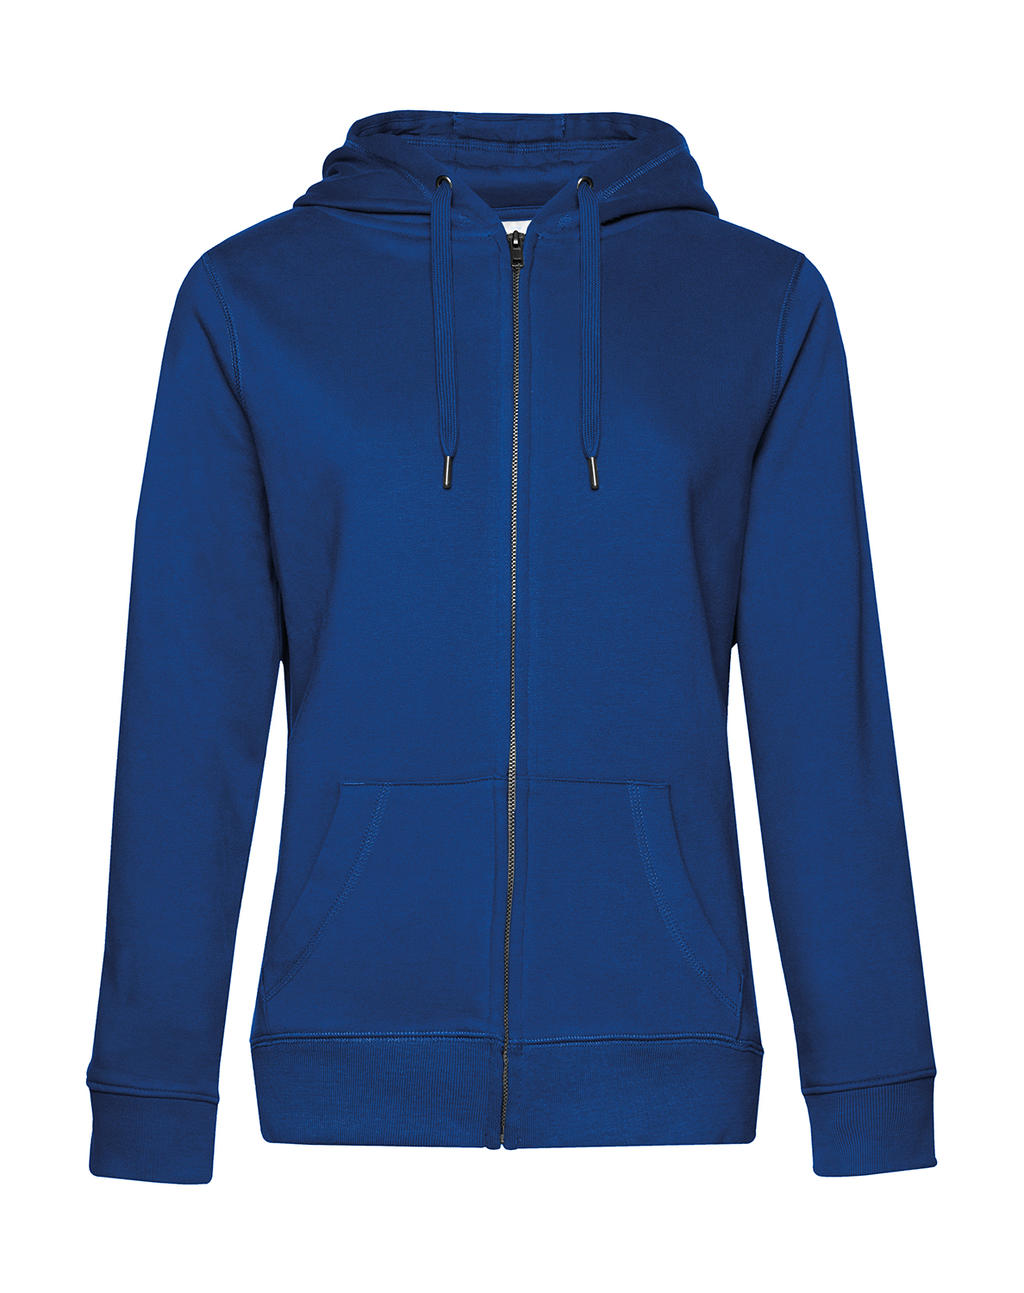  QUEEN Zipped Hood_? in Farbe Royal